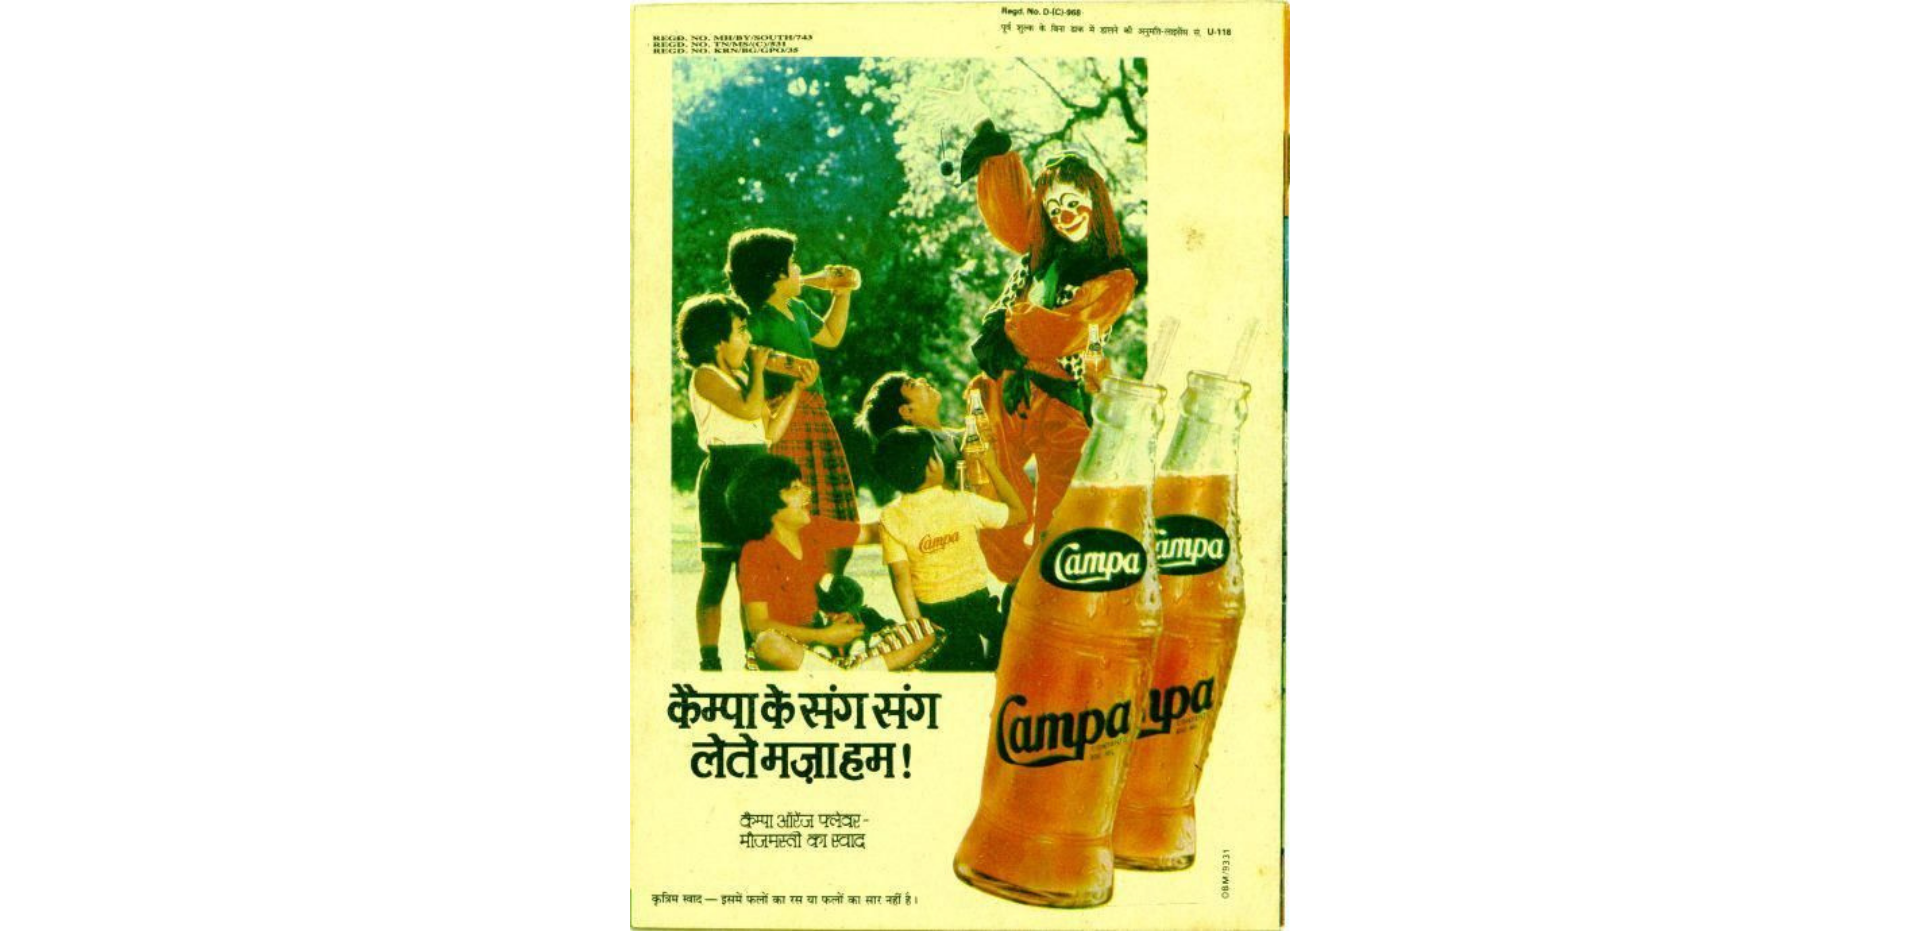 An advertisement for Campa drinks